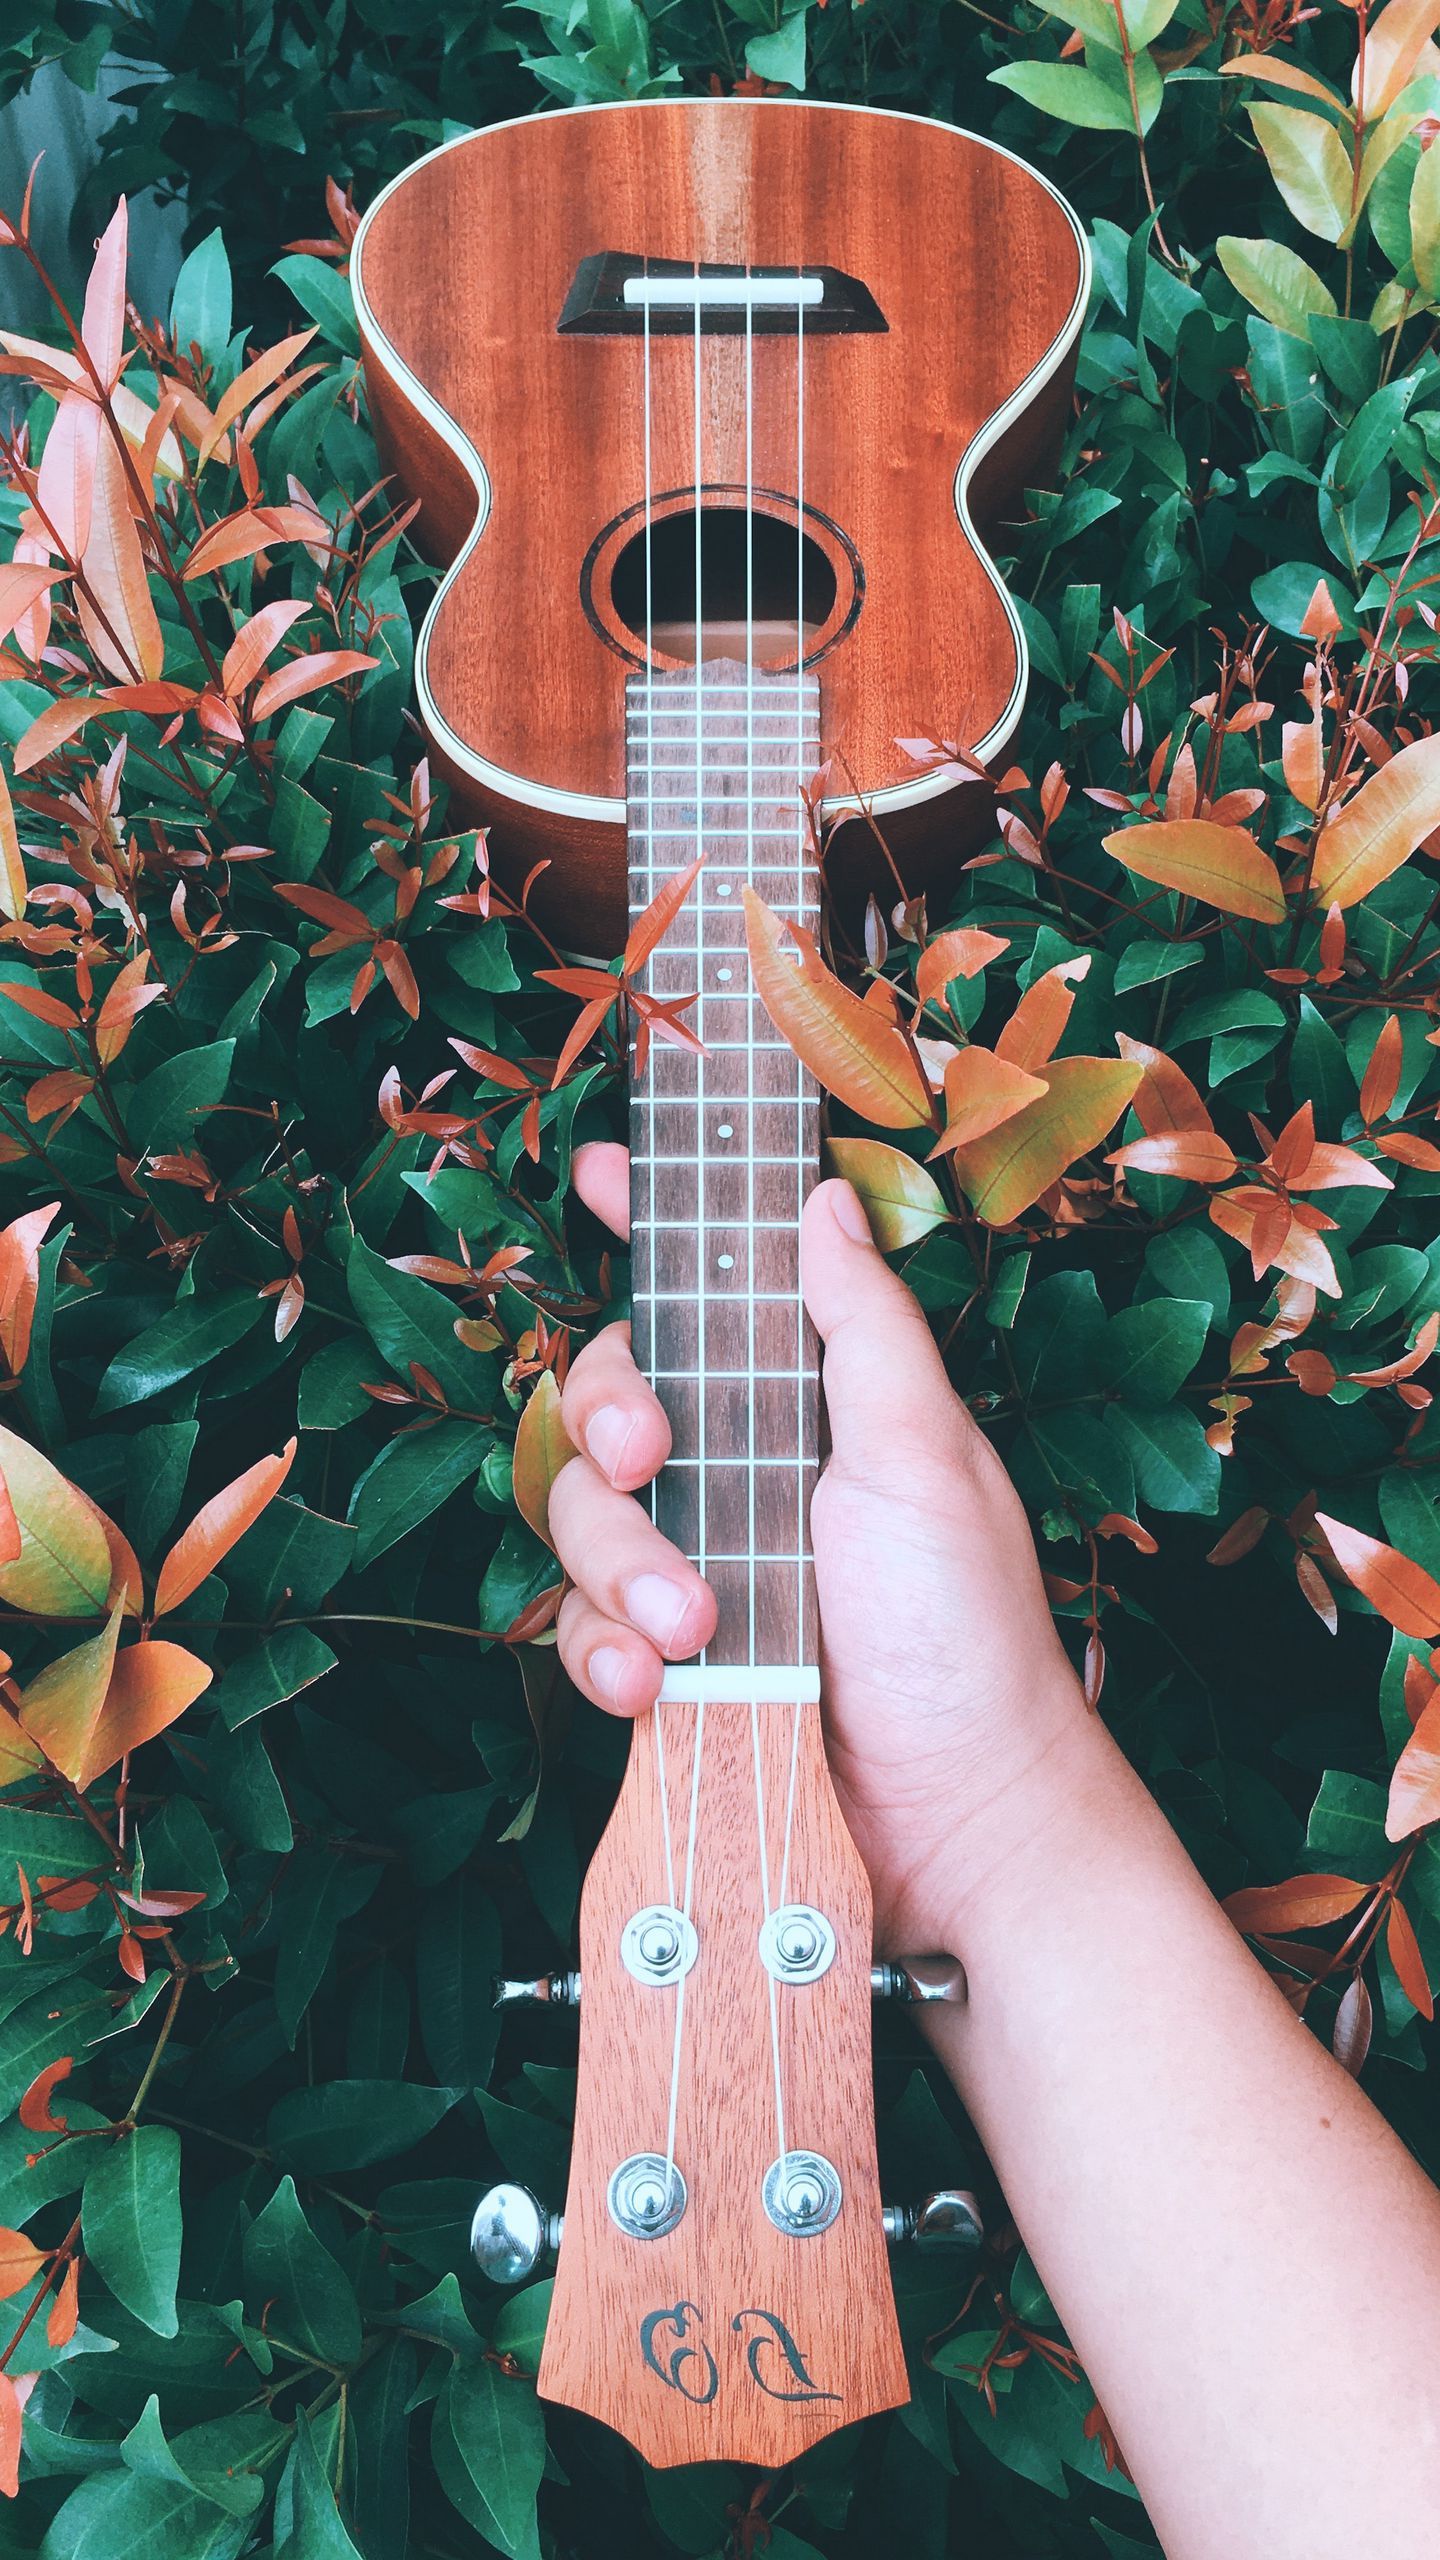 A person holding an ukulele in front of some bushes - Guitar